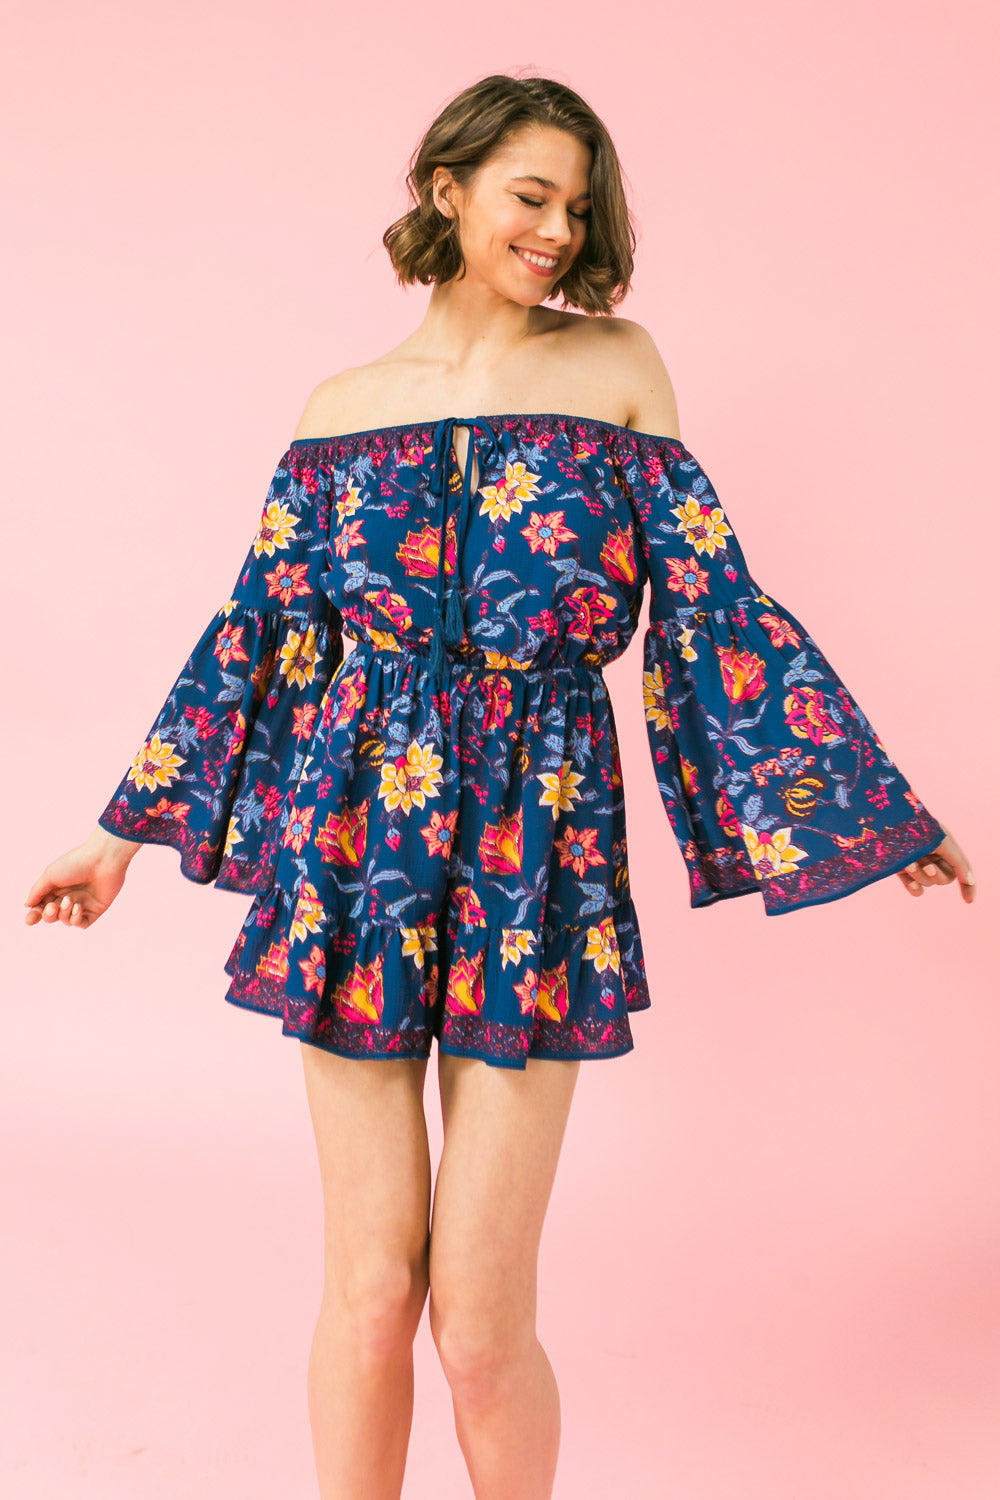 POWER OF LOVE FLORAL ROMPER